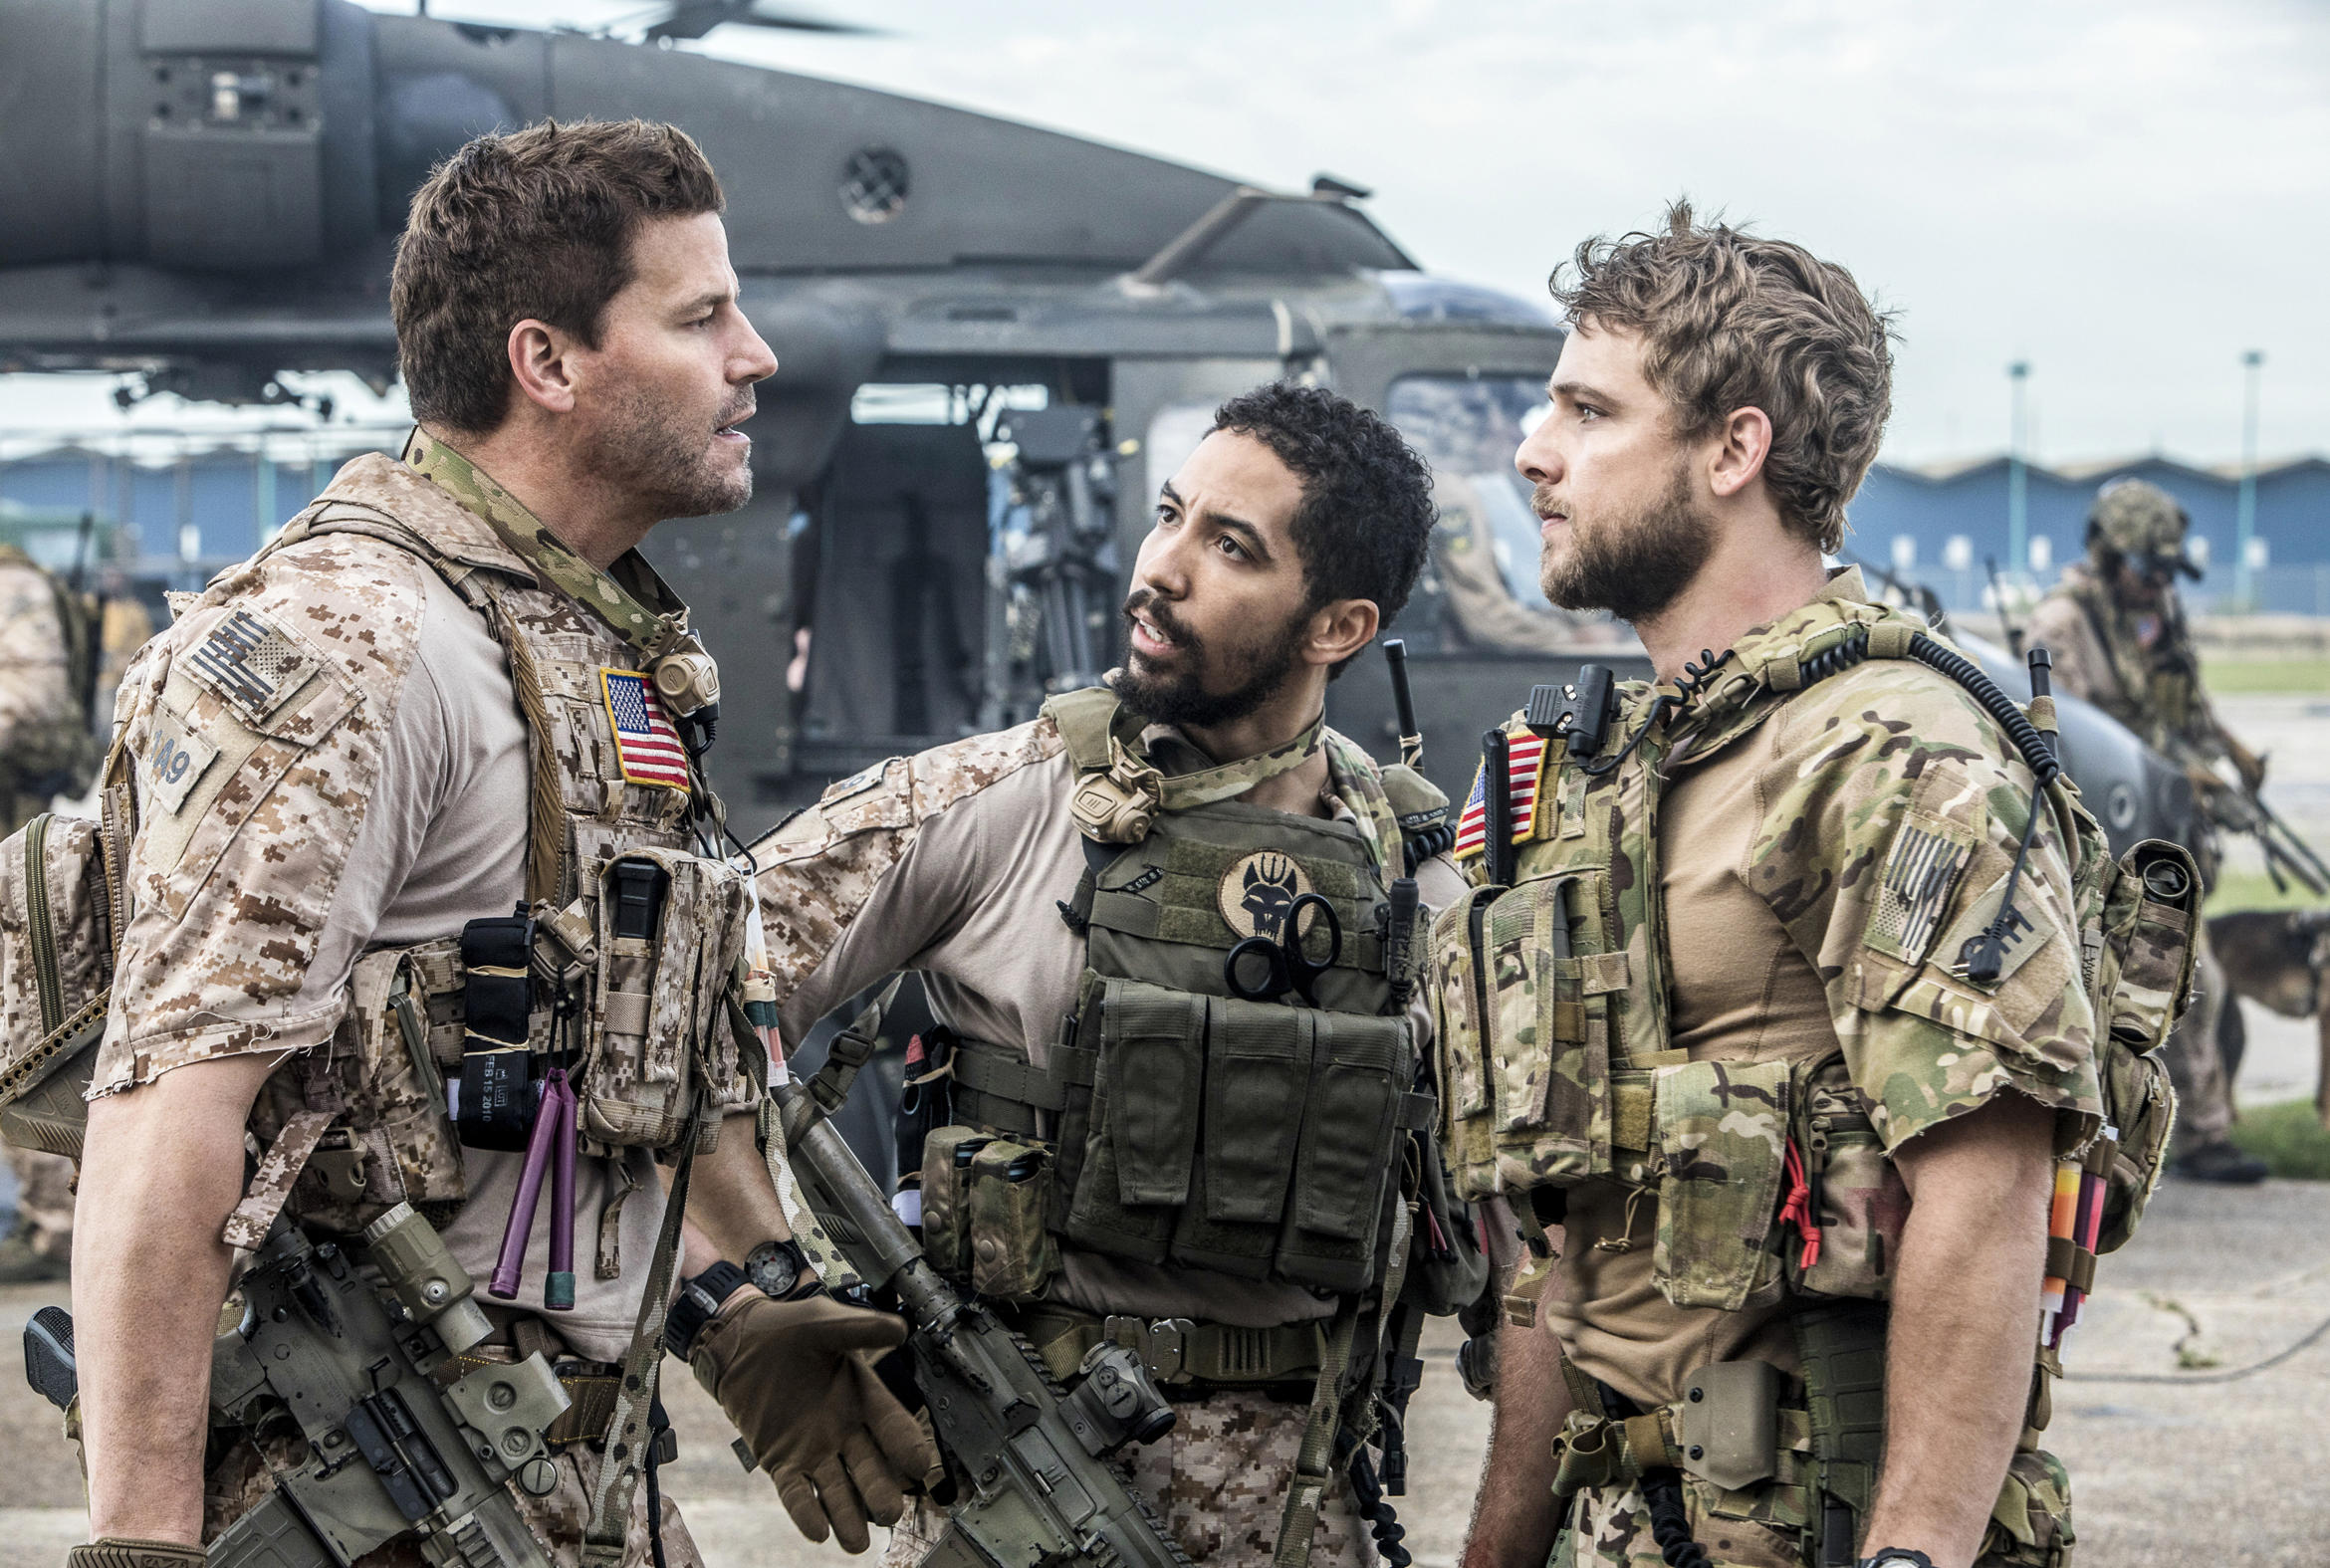 Best New Fall Shows 2017: SEAL Team - Today's News: Our Take | TV Guide